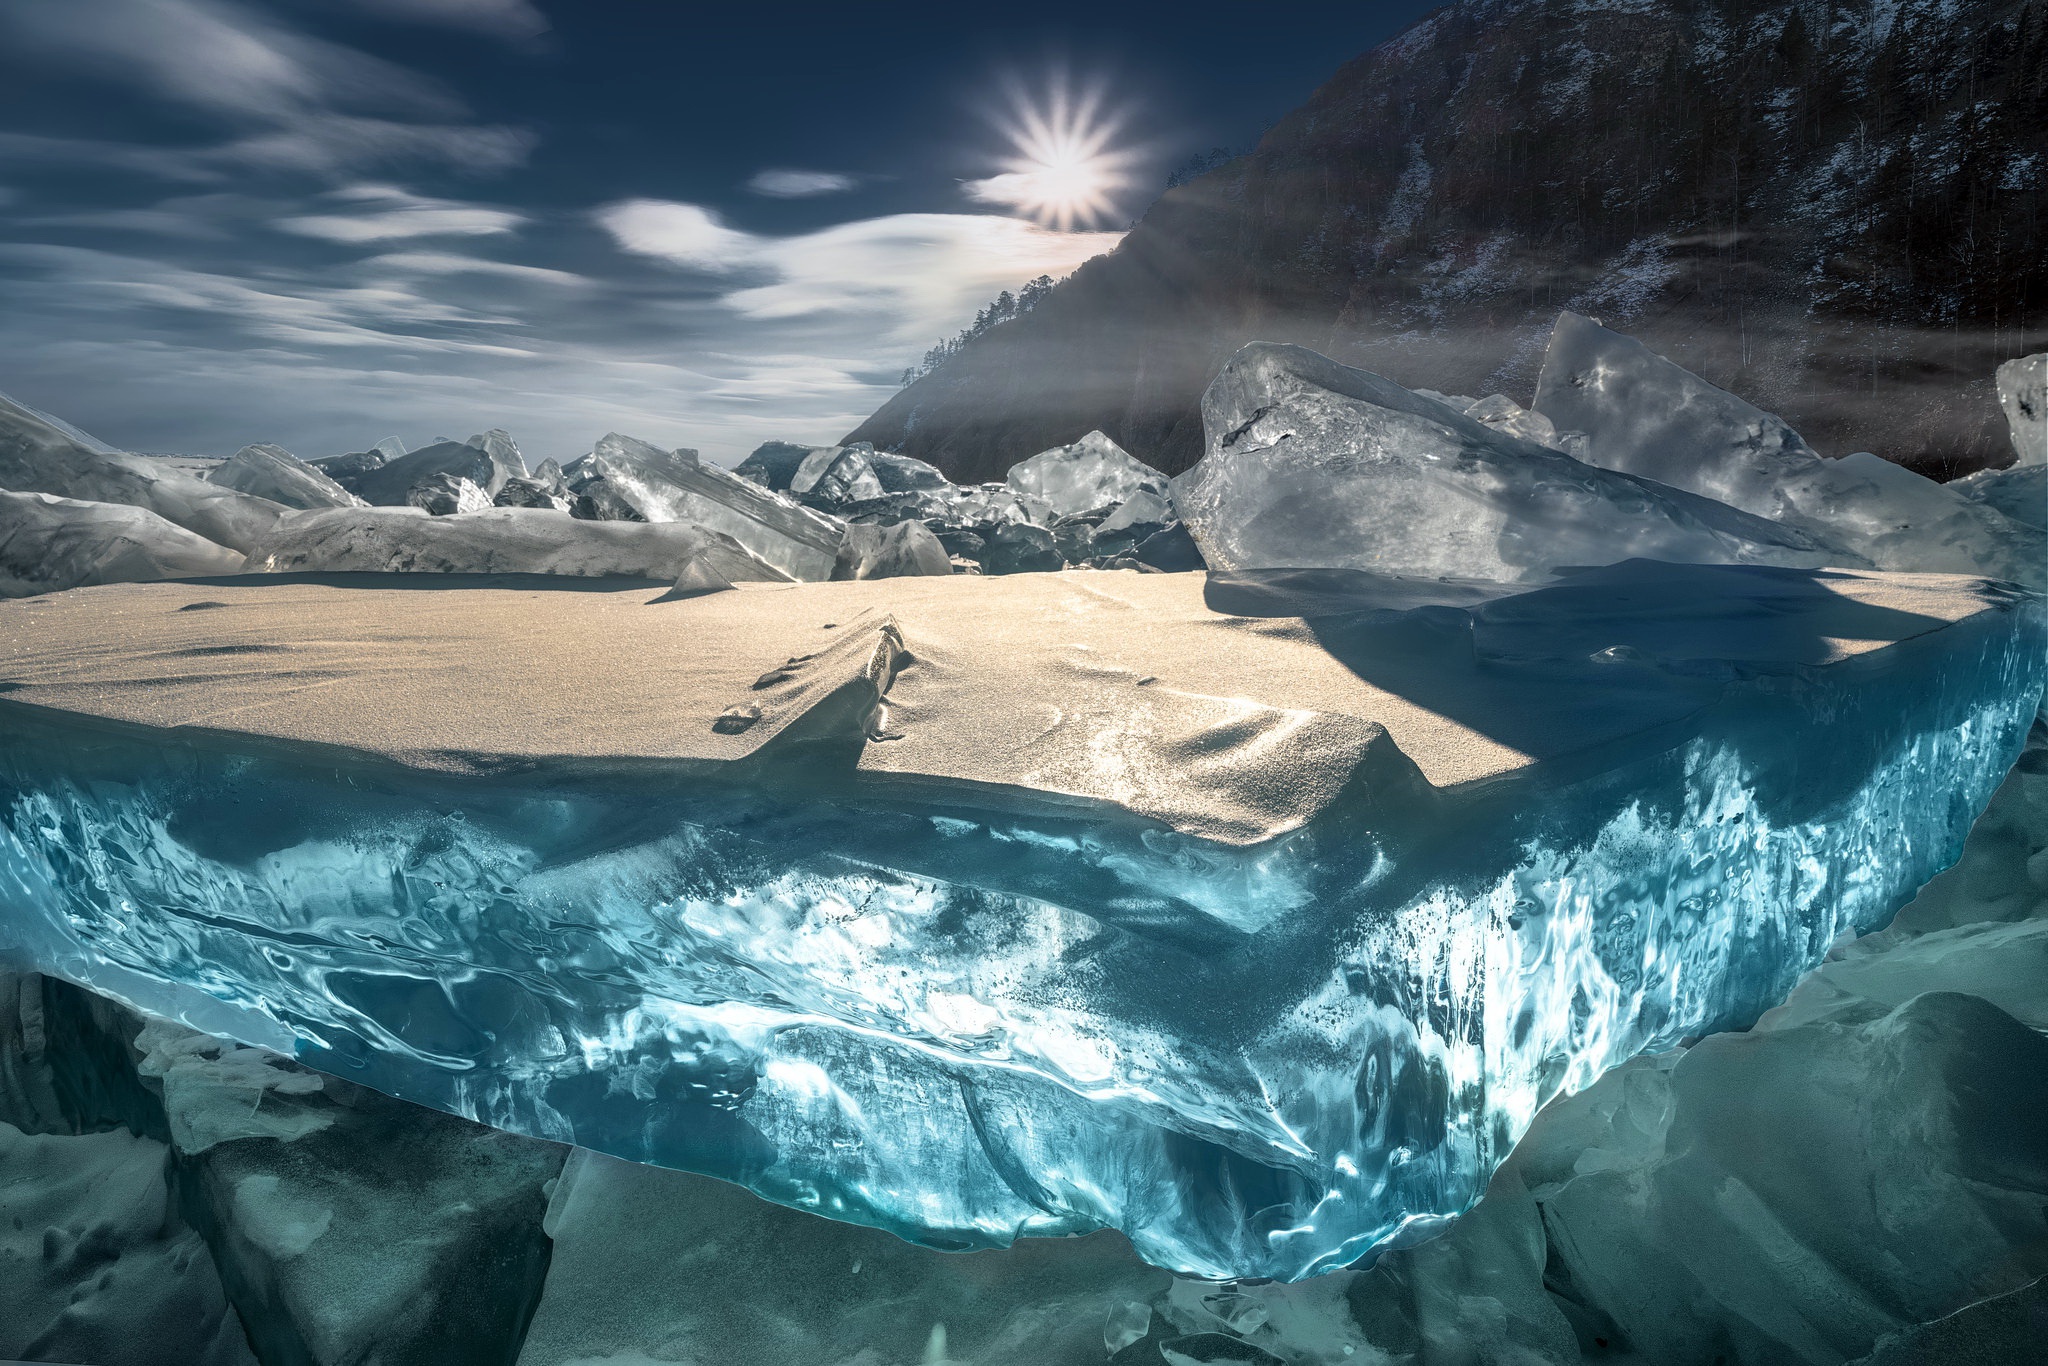 General 2048x1366 nature winter ice long exposure sun rays turquoise